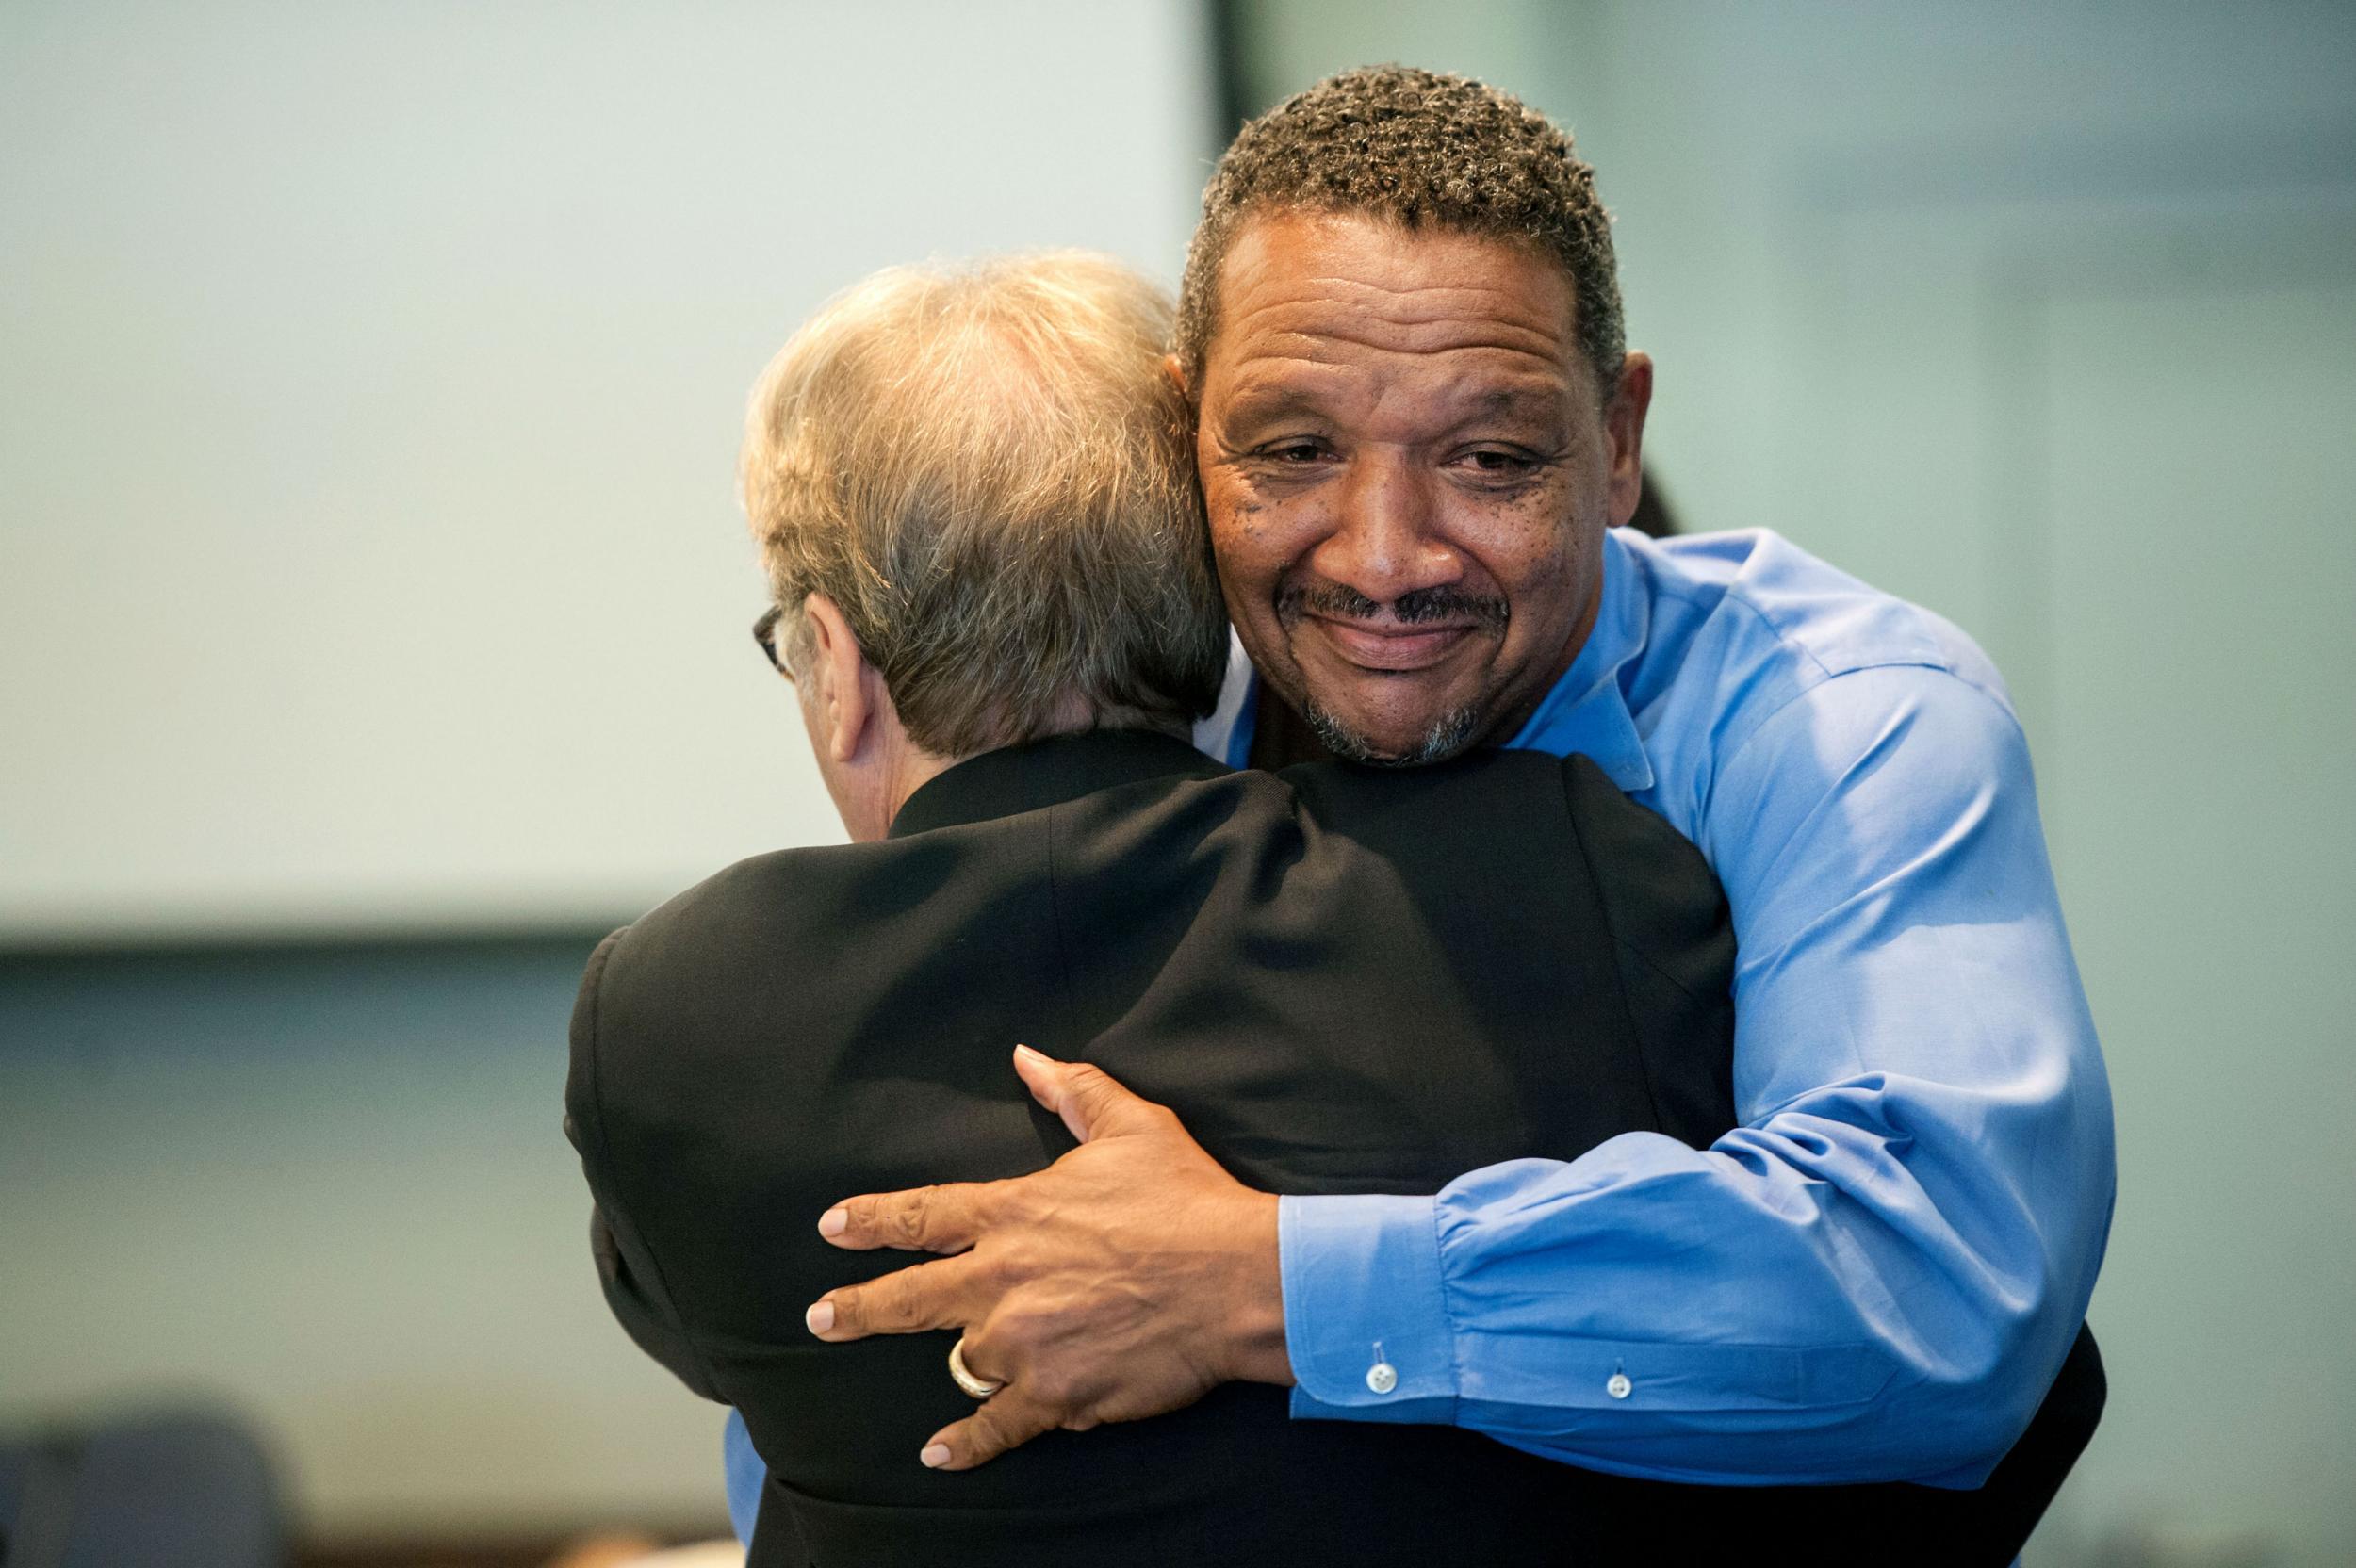 Darryl Howard hugs Barry Scheck of the Innocence Project after the ruling